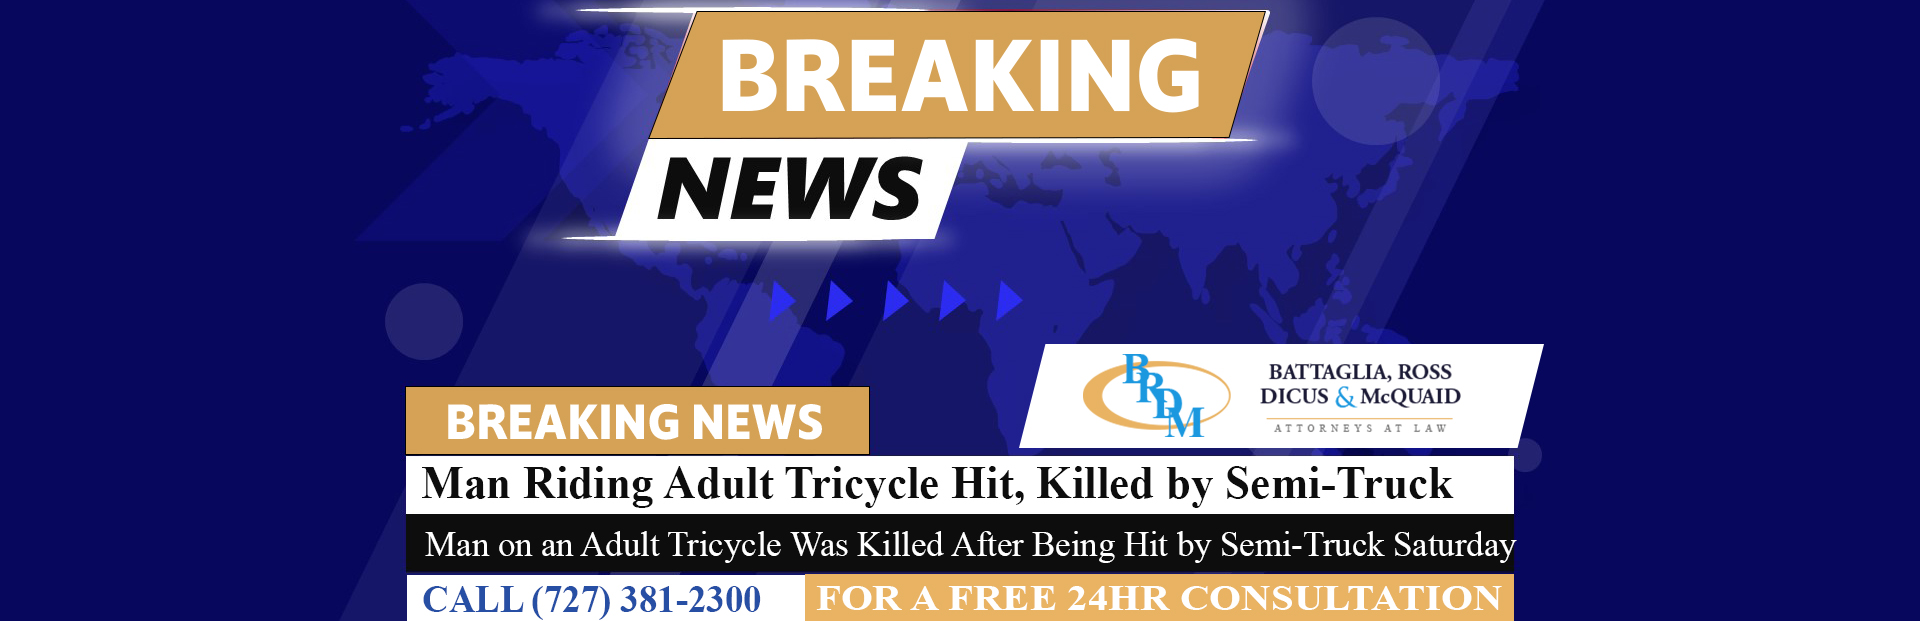 [01-03-23] Man Riding Adult Tricycle Hit, Killed by Semi-Truck in St. Pete